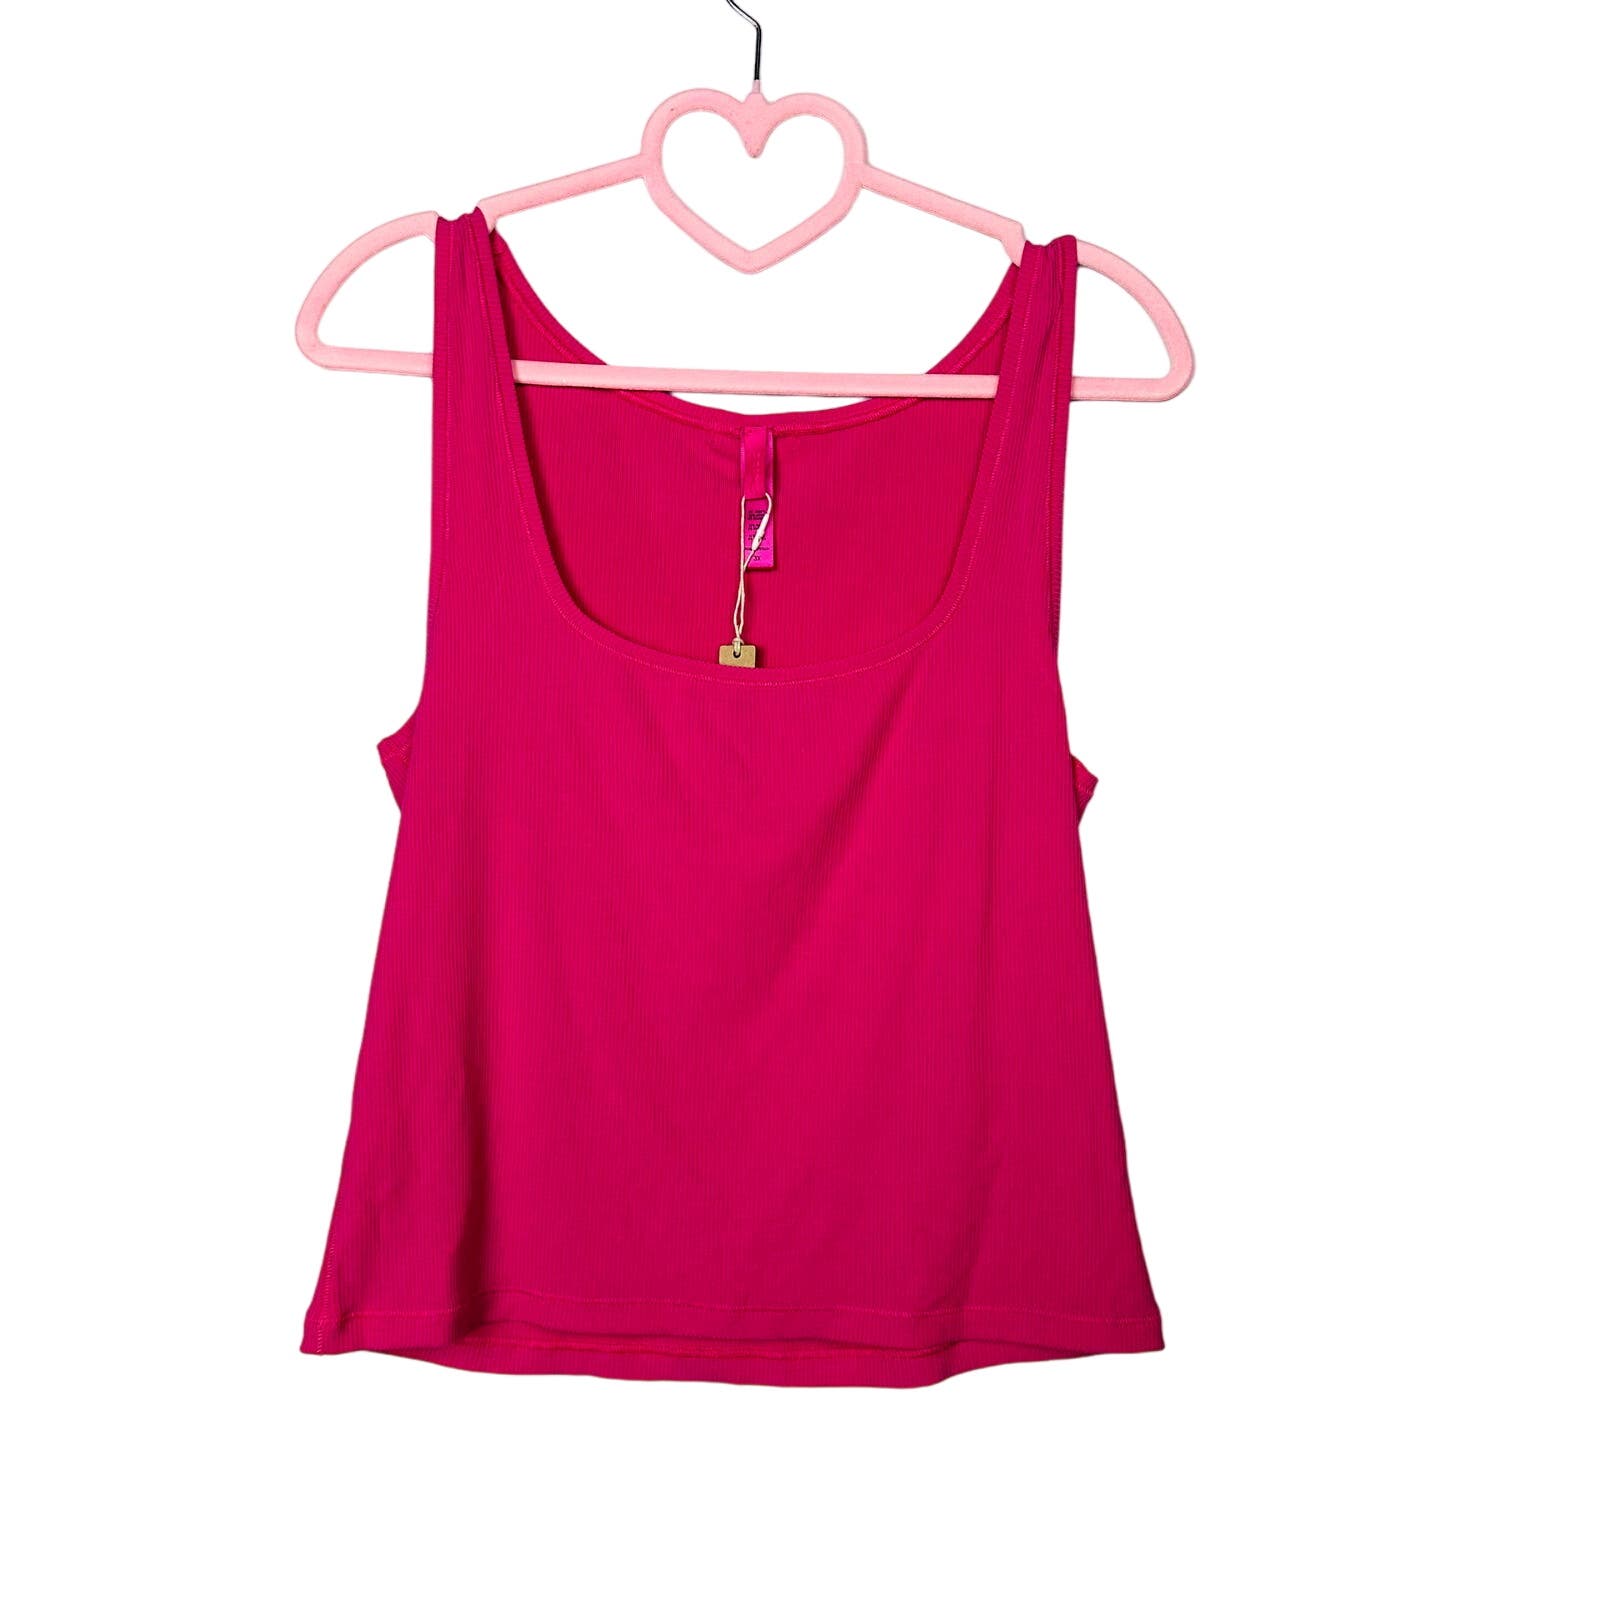 SKIMS NWT Hot Pink Soft Lounge Scoop Neck Tank Size 3X